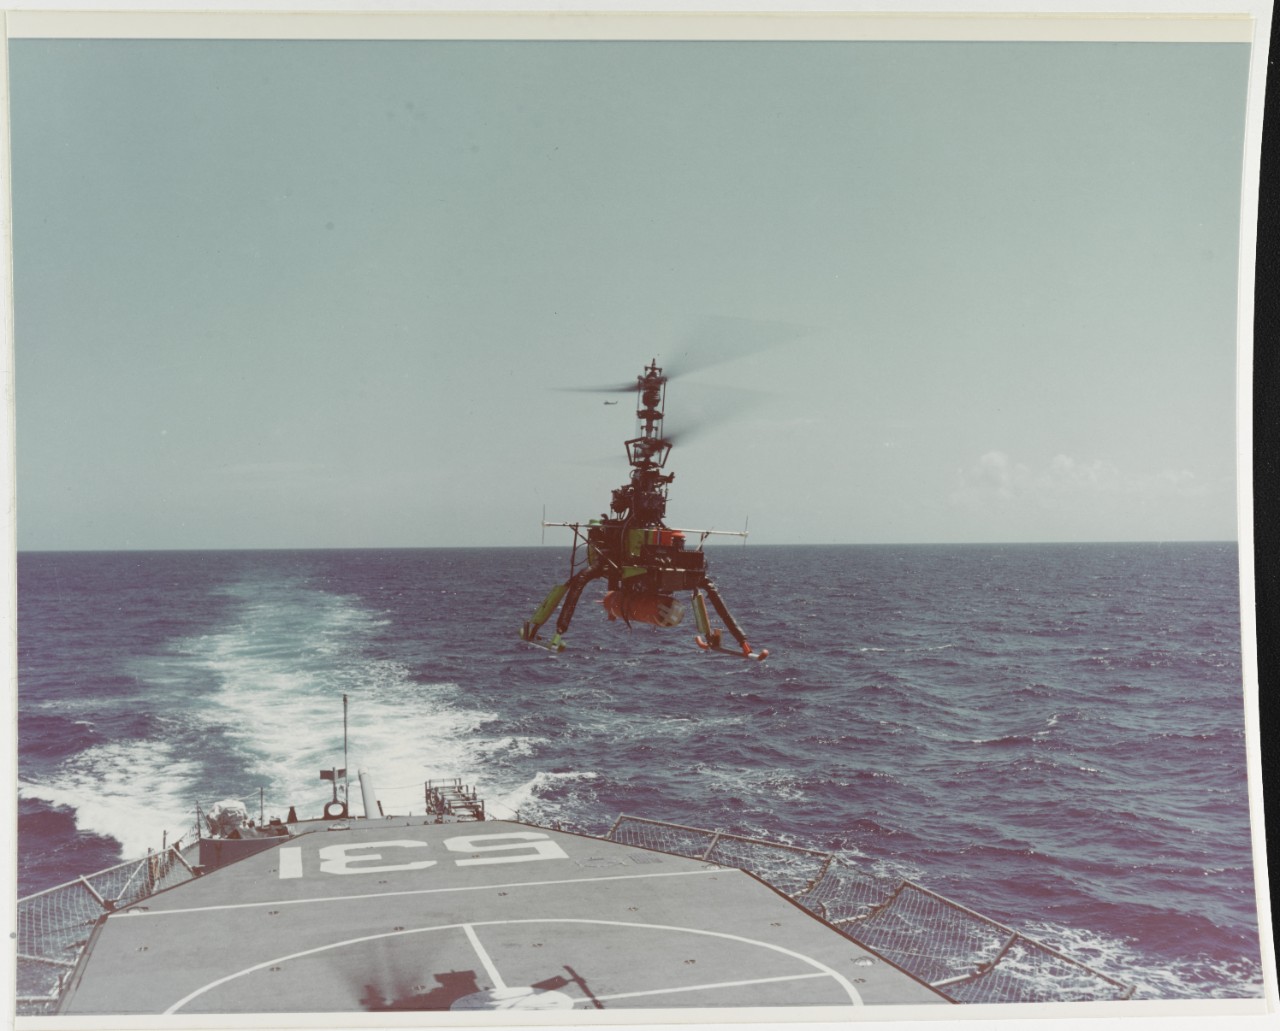 "DASH" (Drone Anti-Submarine Helicopter) in free flight over USS HAZELWOOD (DD-531)